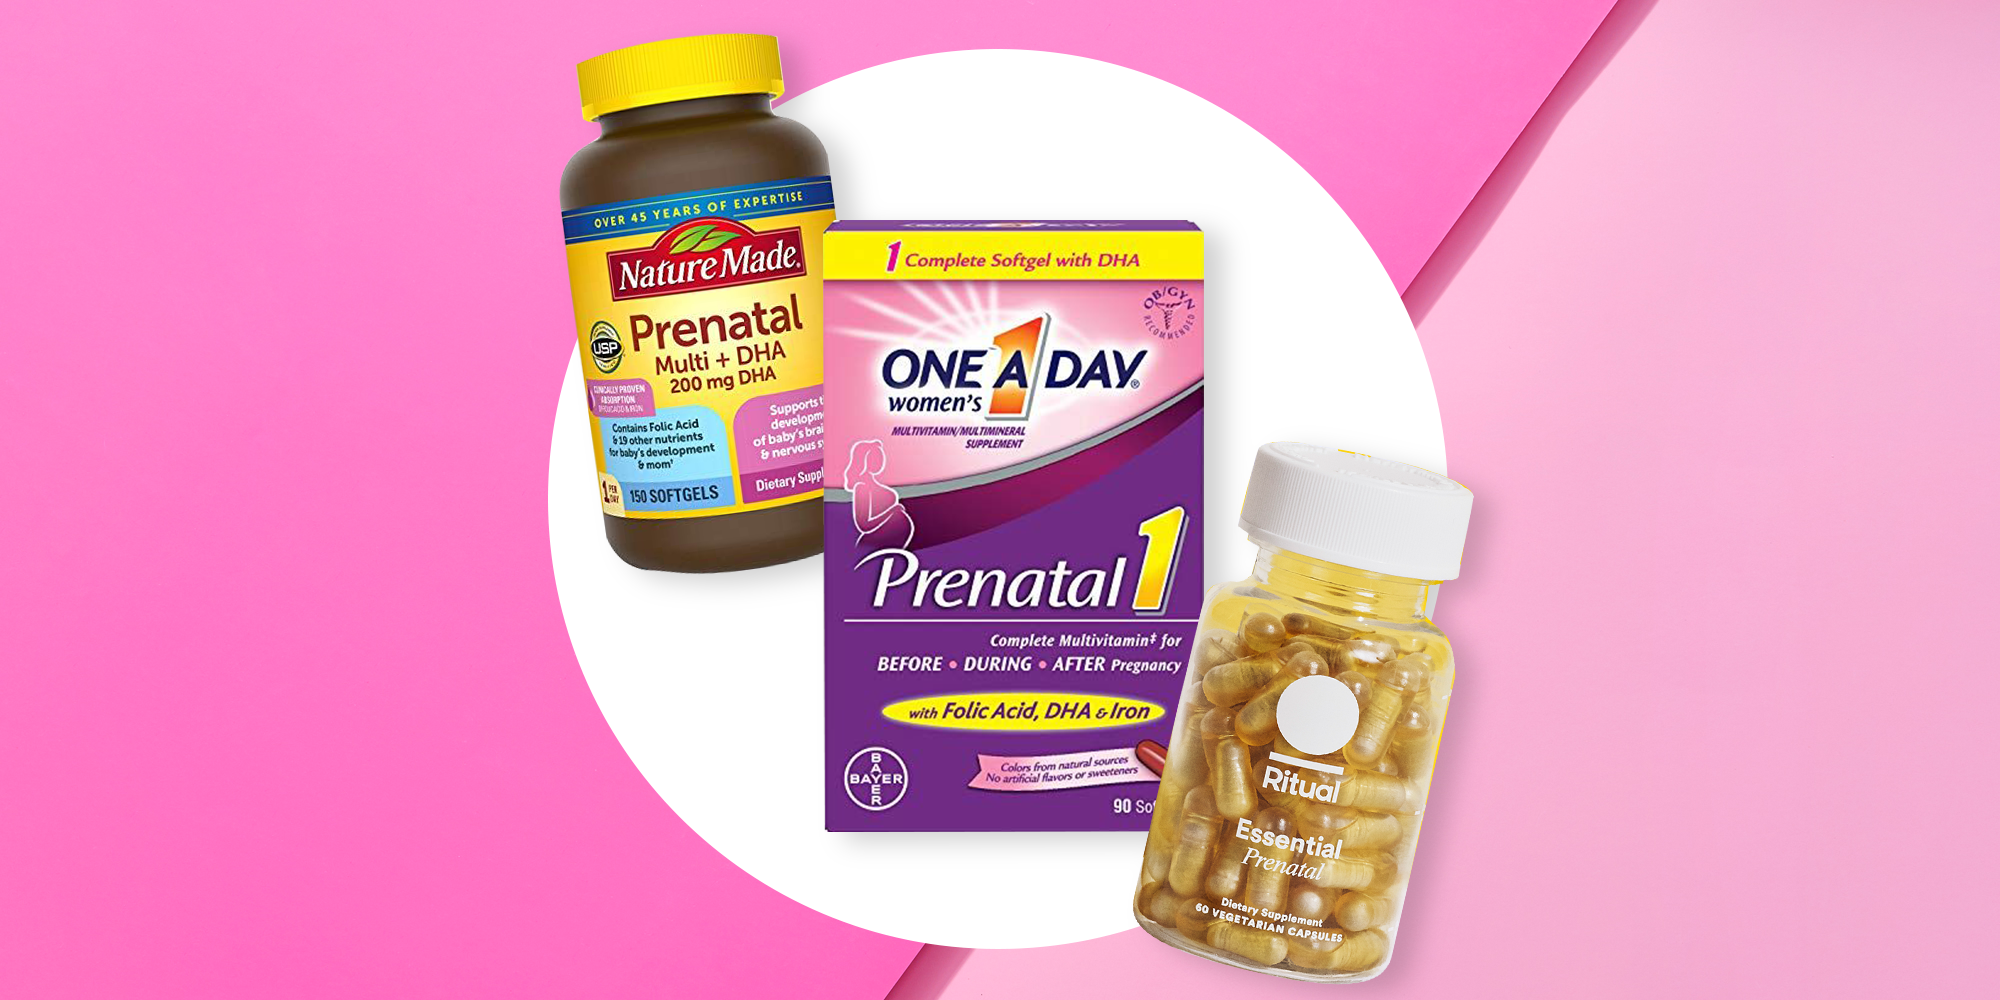 13 Best Pregnancy Products of 2022